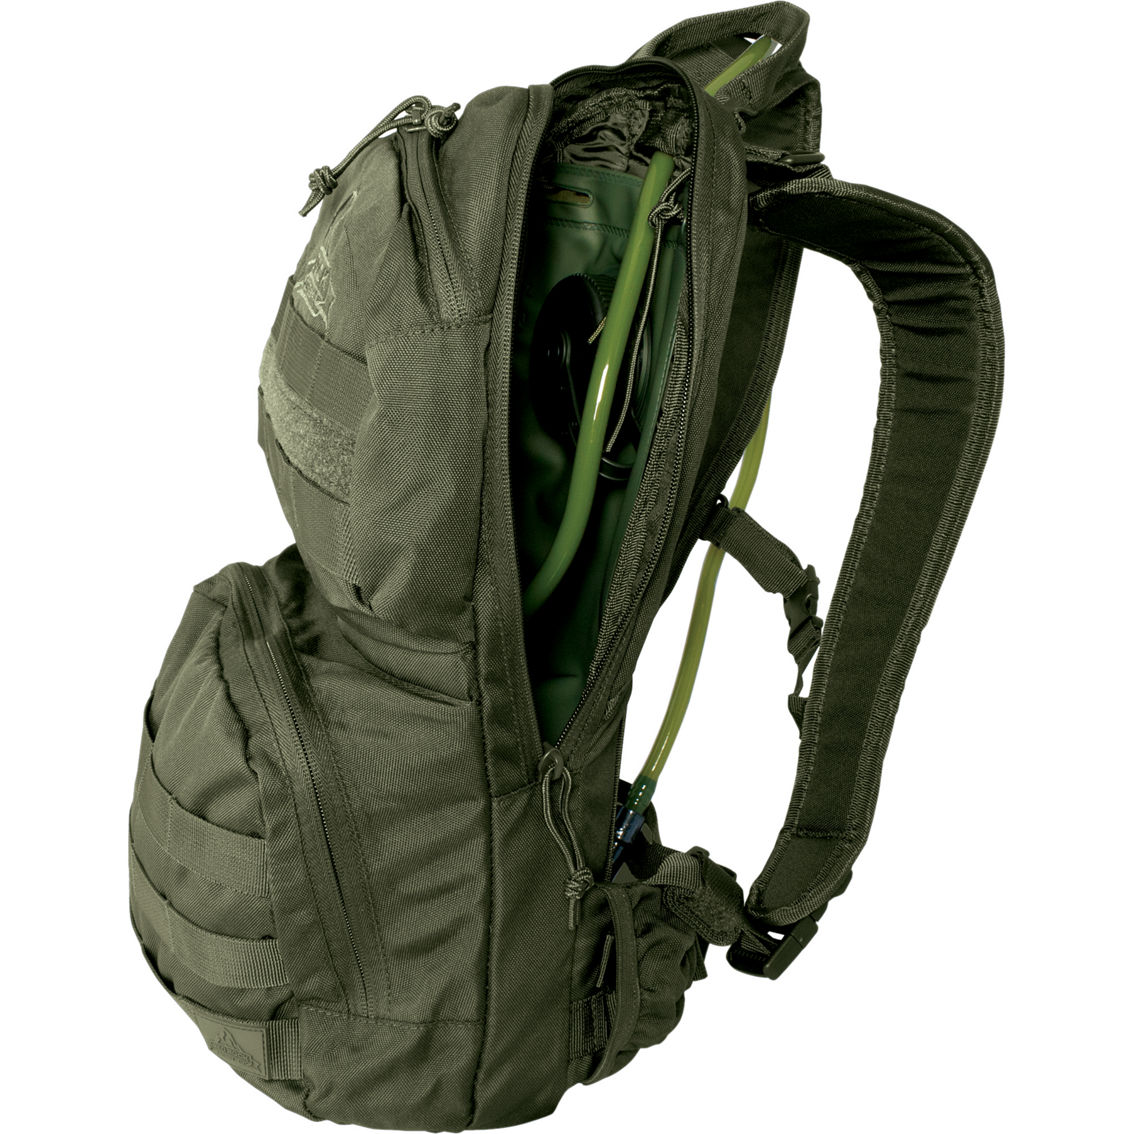 Red Rock Outdoor Gear Cactus Hydration Pack - Image 5 of 7